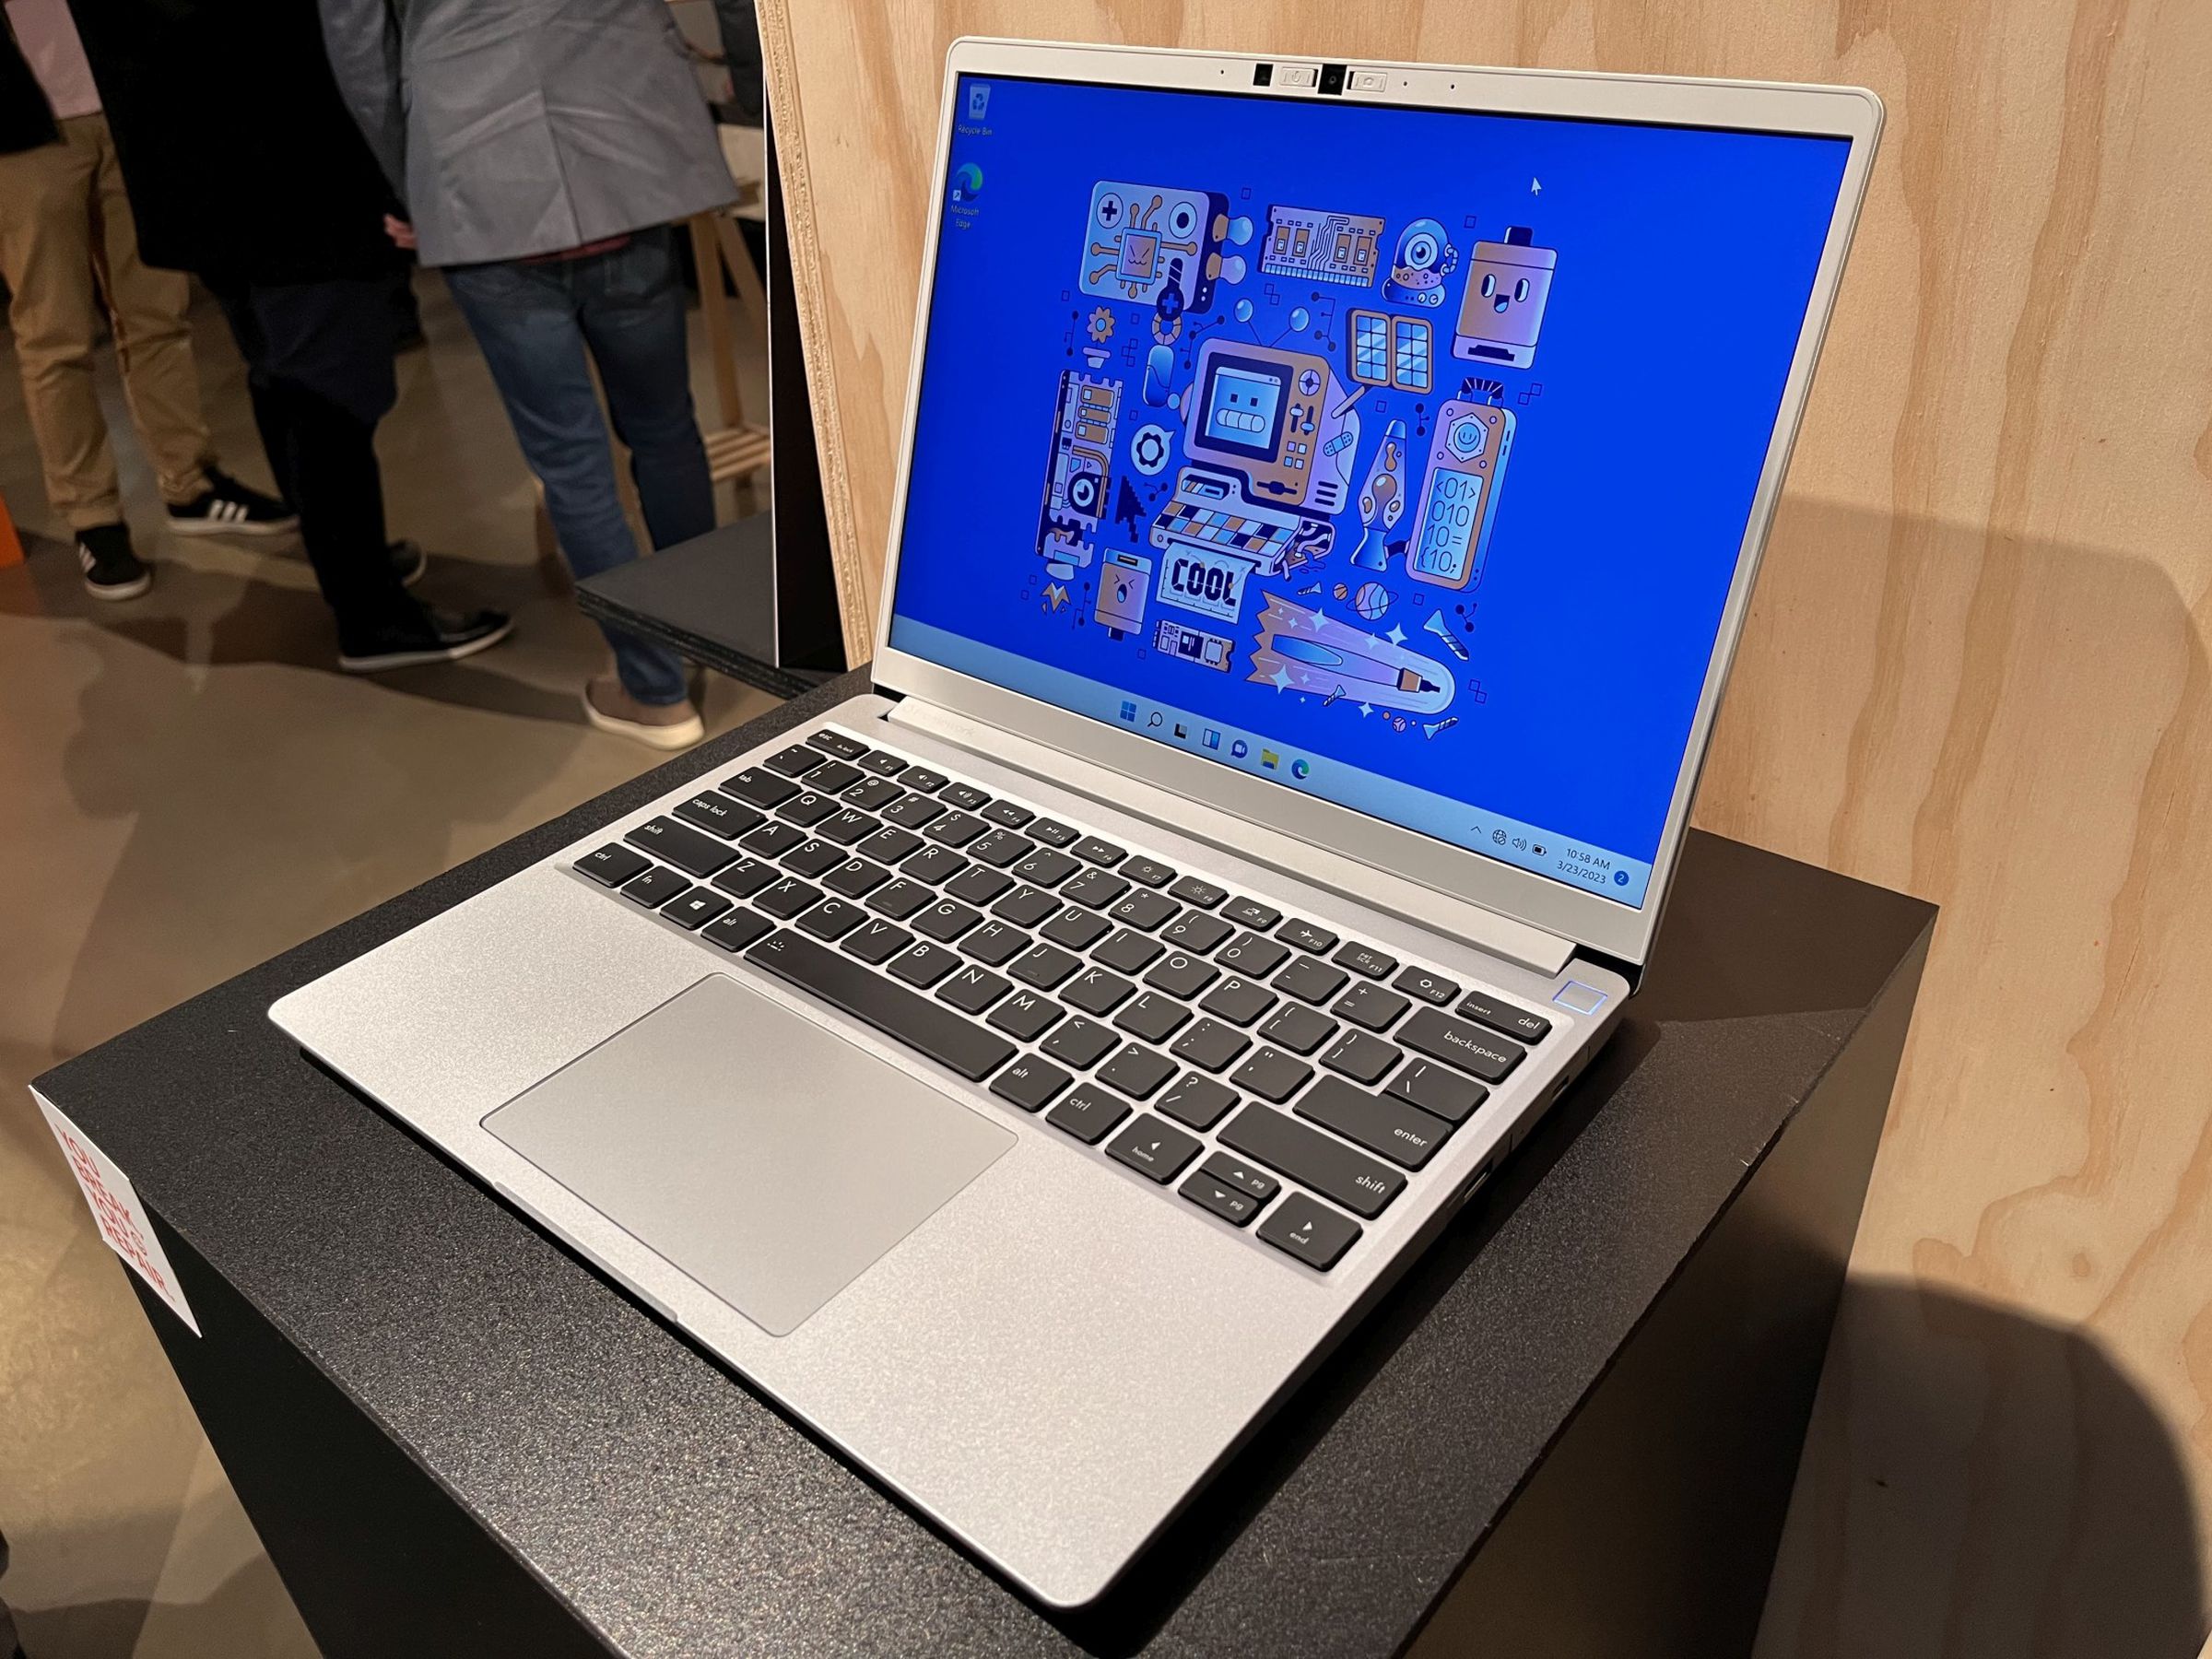 AMD or Intel, the laptop looks like this. We took this pic at Framework’s event today, where the AMD version was not actually on display.